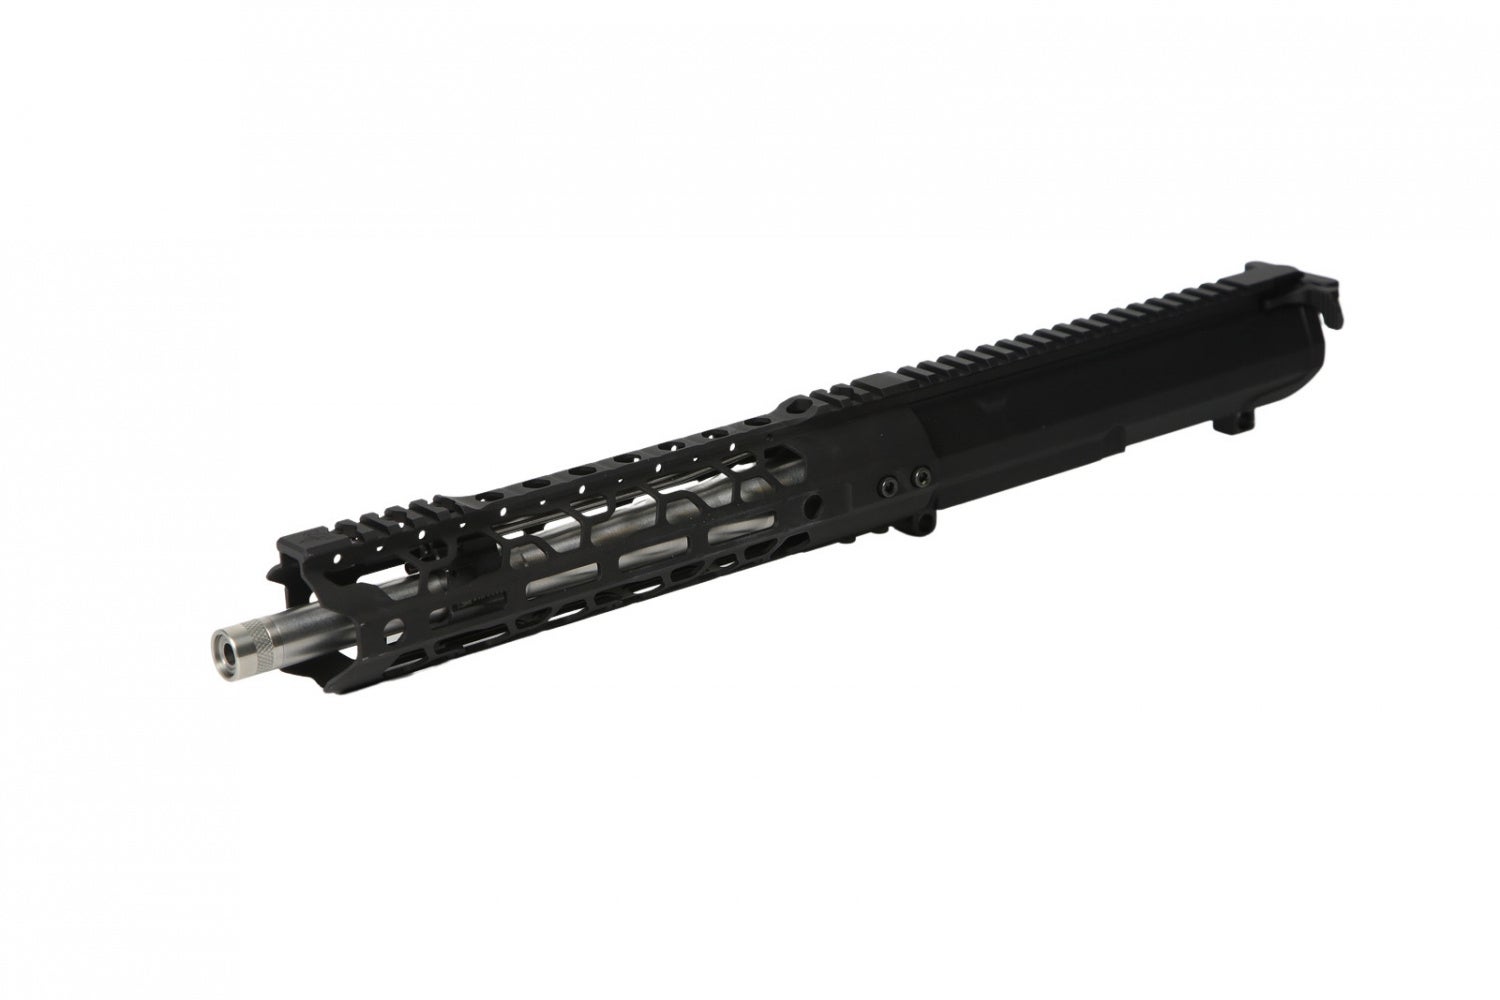 With a multi-cal BCG and eXtended charging handle included, this upper is ready to mate to your AR-10 lower of choice.